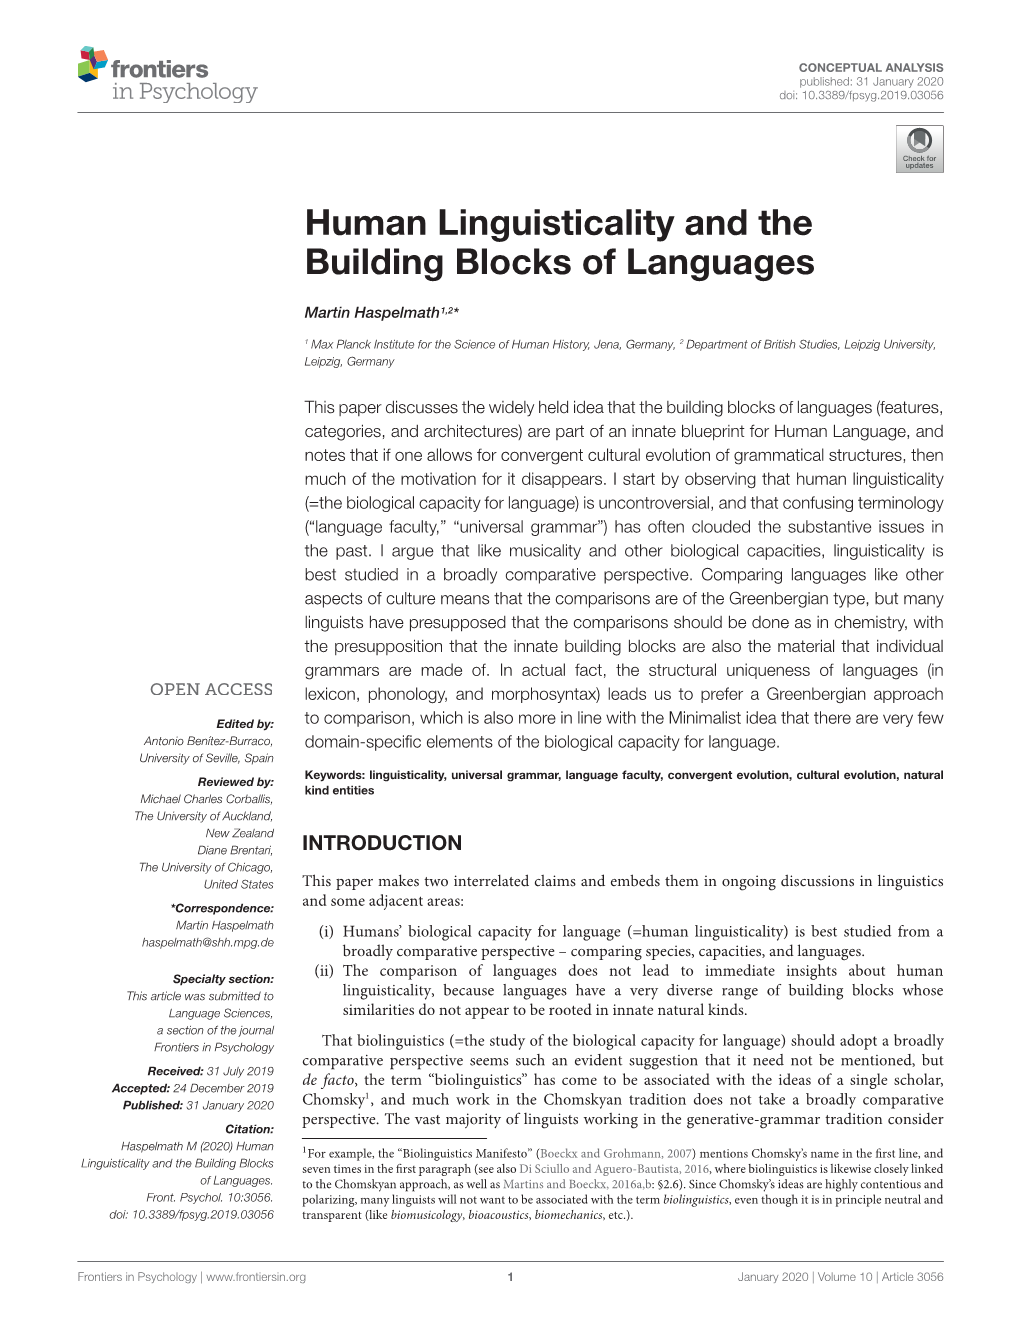 Human Linguisticality and the Building Blocks of Languages